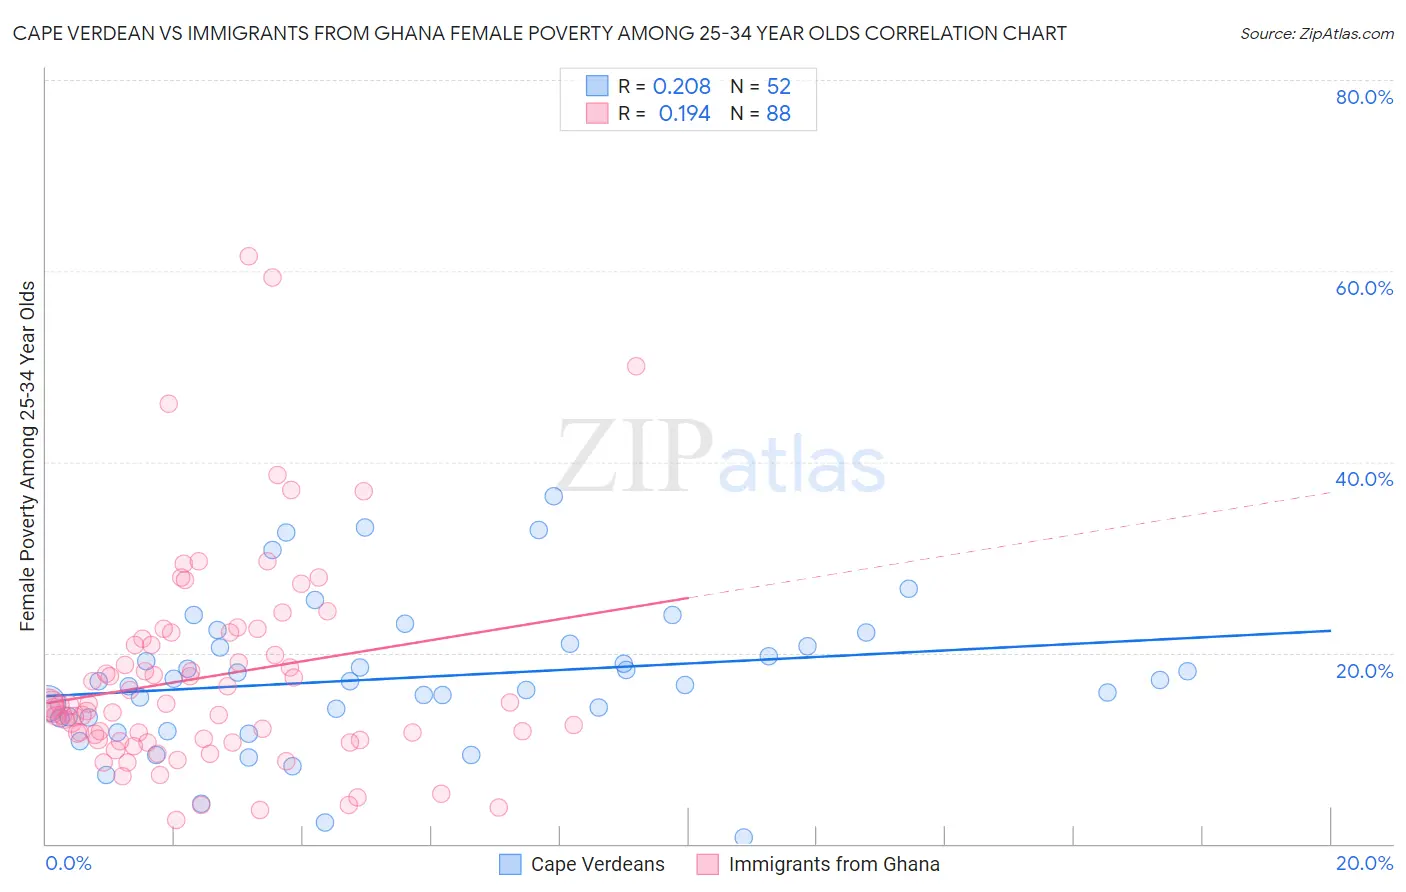 Cape Verdean vs Immigrants from Ghana Female Poverty Among 25-34 Year Olds